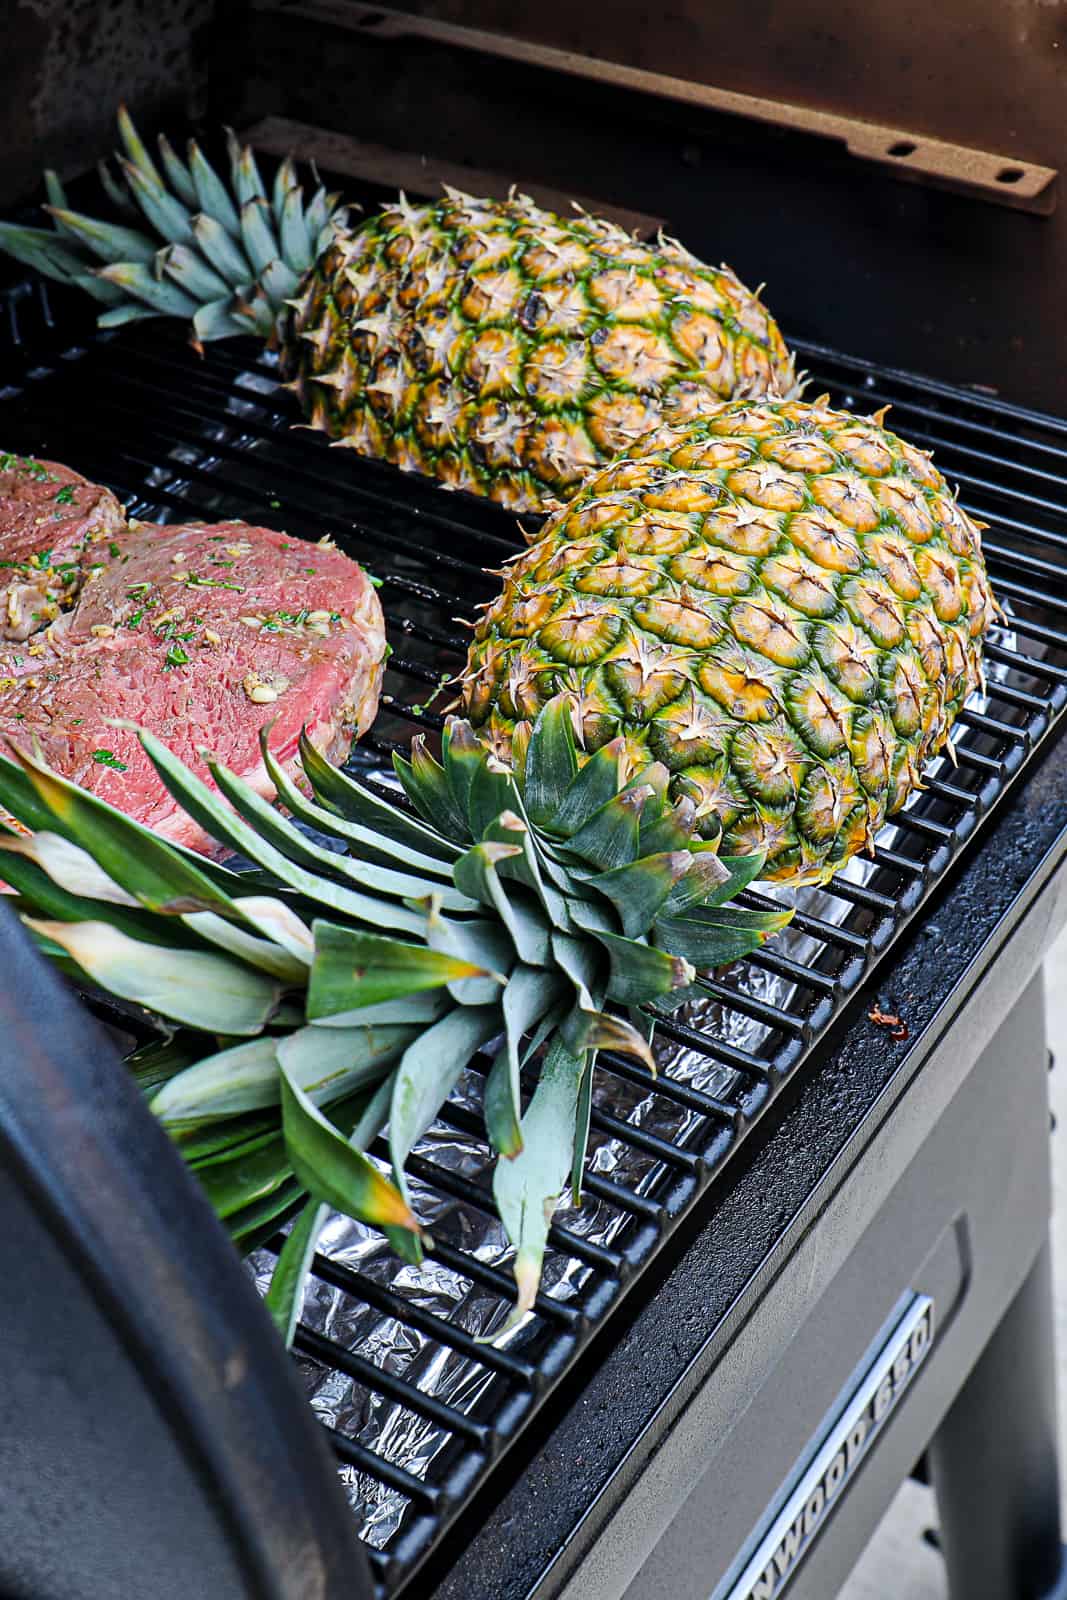 Smoking Pineapples In The Traeger Pellet Grill Cut Side Down With Steak Dinner